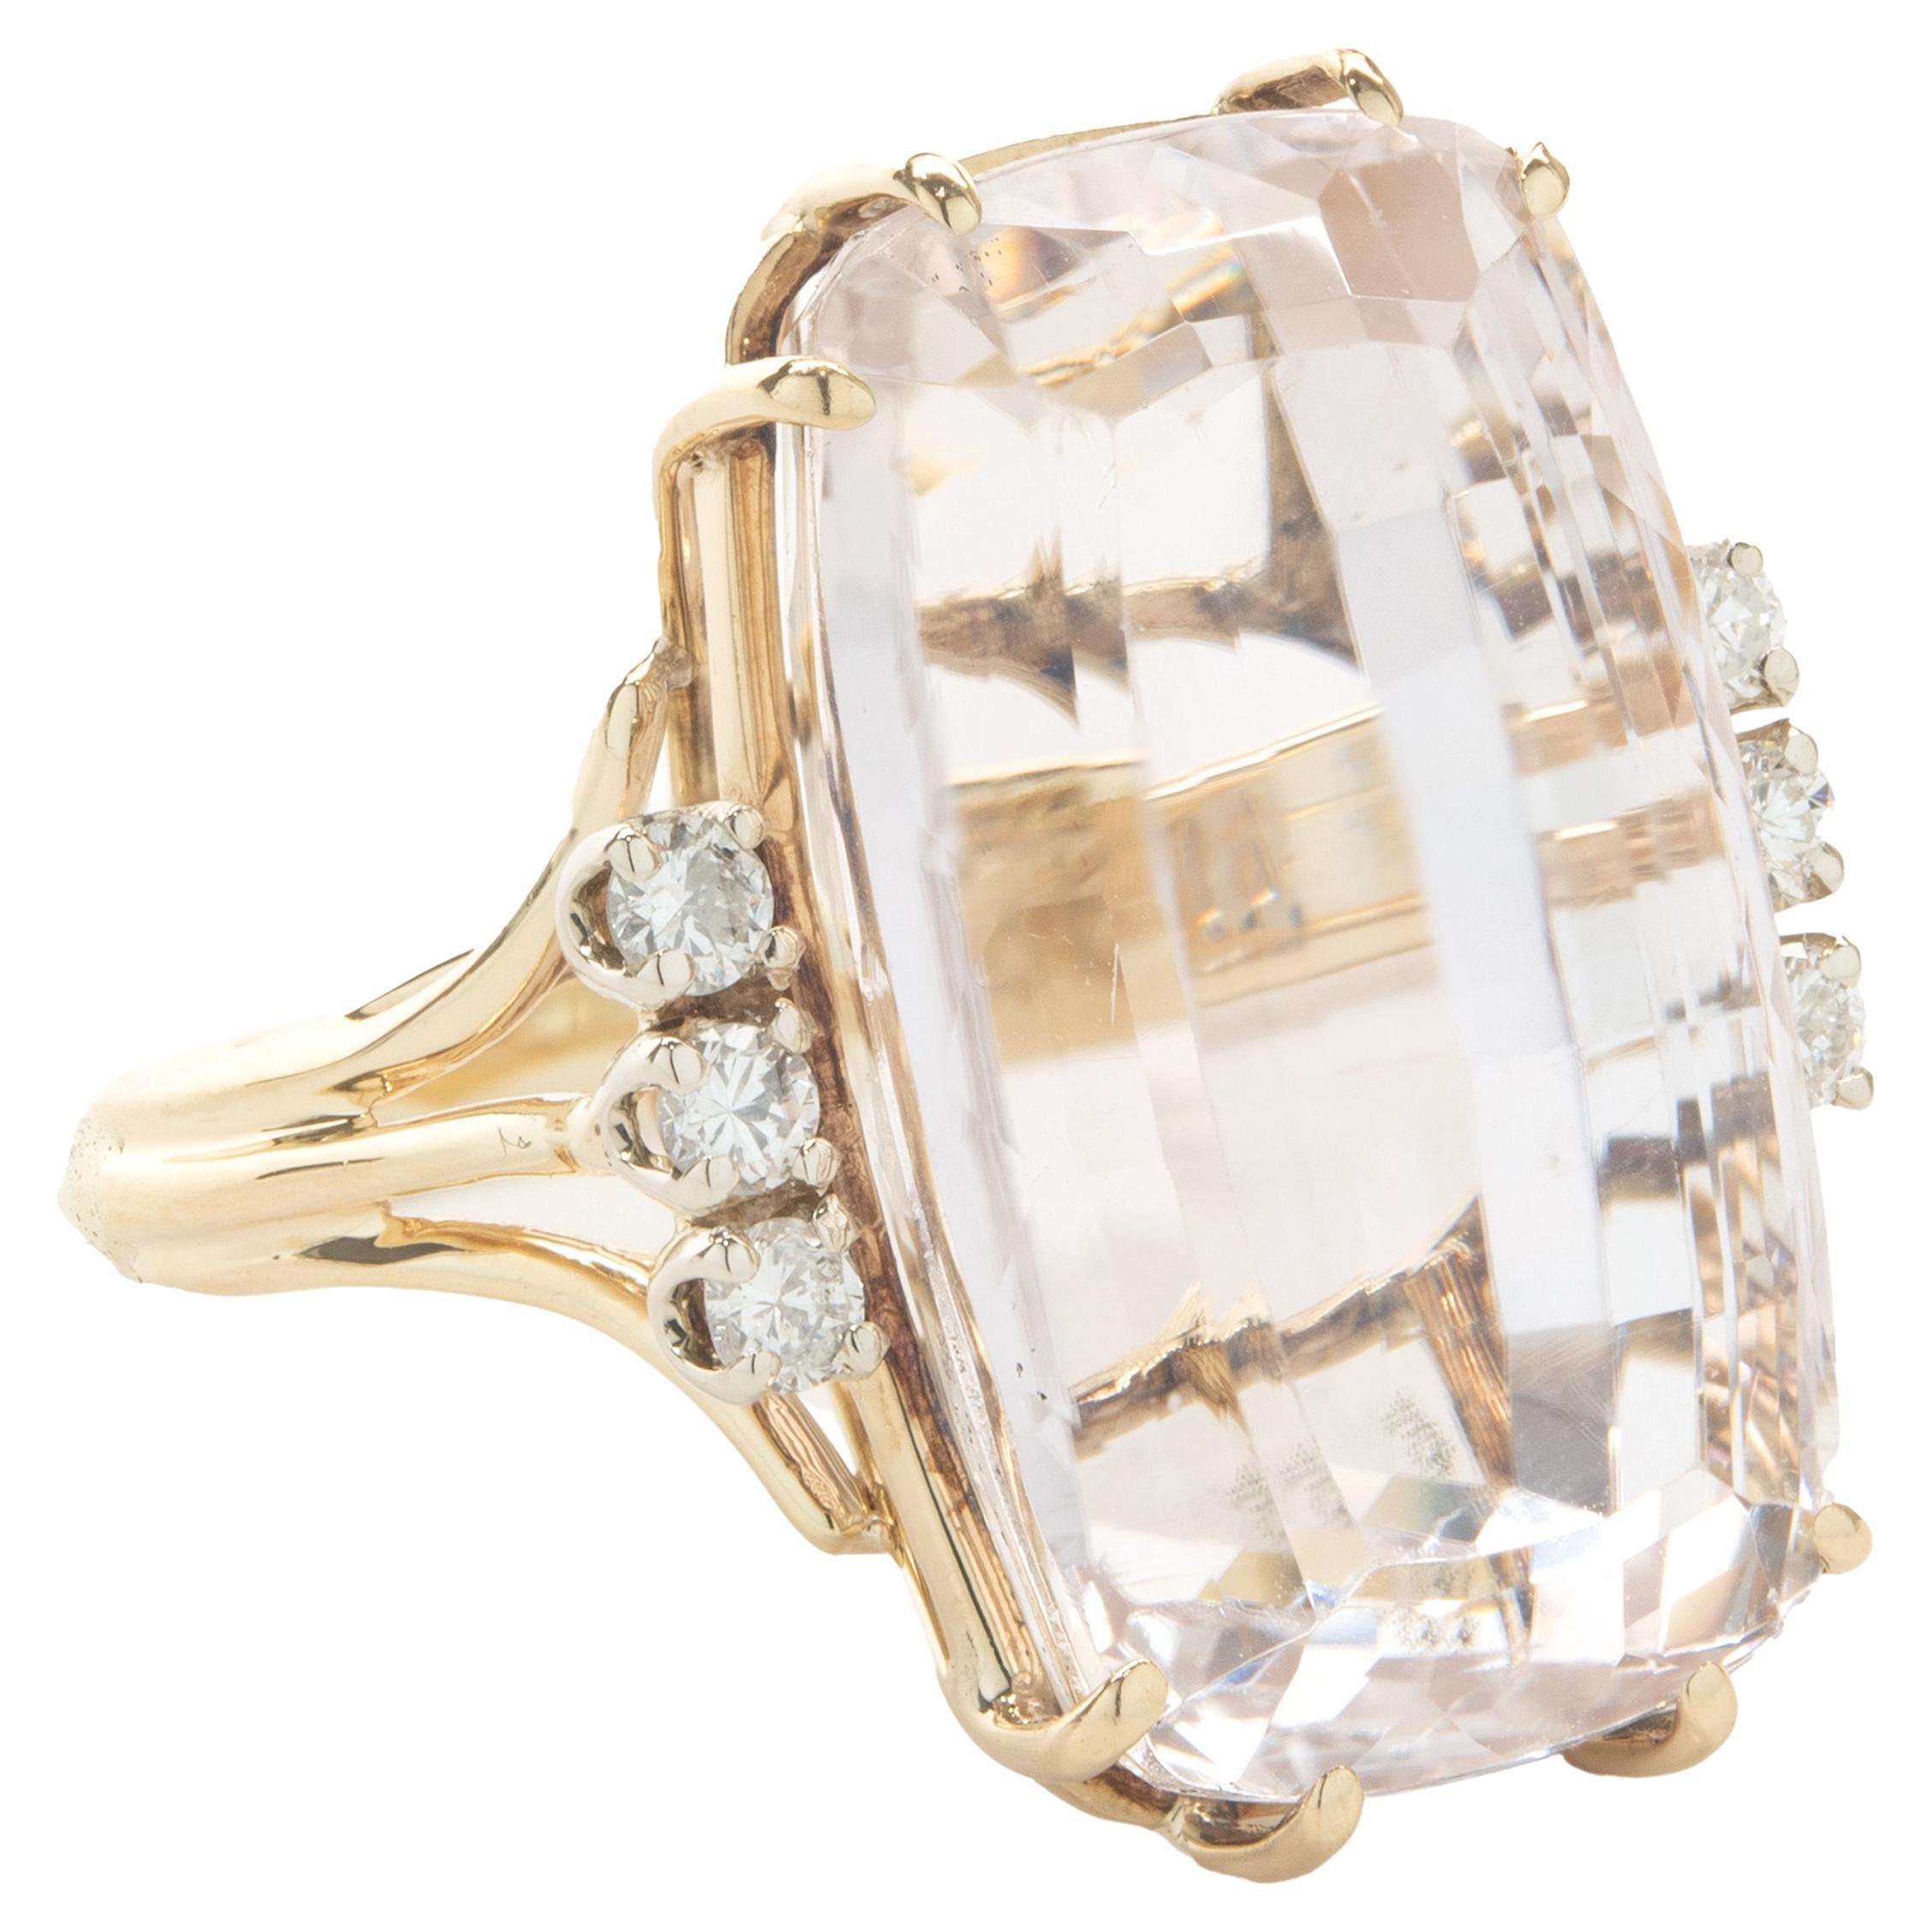 Designer: custom
Material: 14K yellow gold
Diamond: 6 round brilliant cut = .12cttw
Color: G
Clarity: SI1
Morganite: 19.50ct
Ring Size: 5 (please allow up to 2 additional business days for sizing requests)
Dimensions: ring top measures 23mm 
Weight: